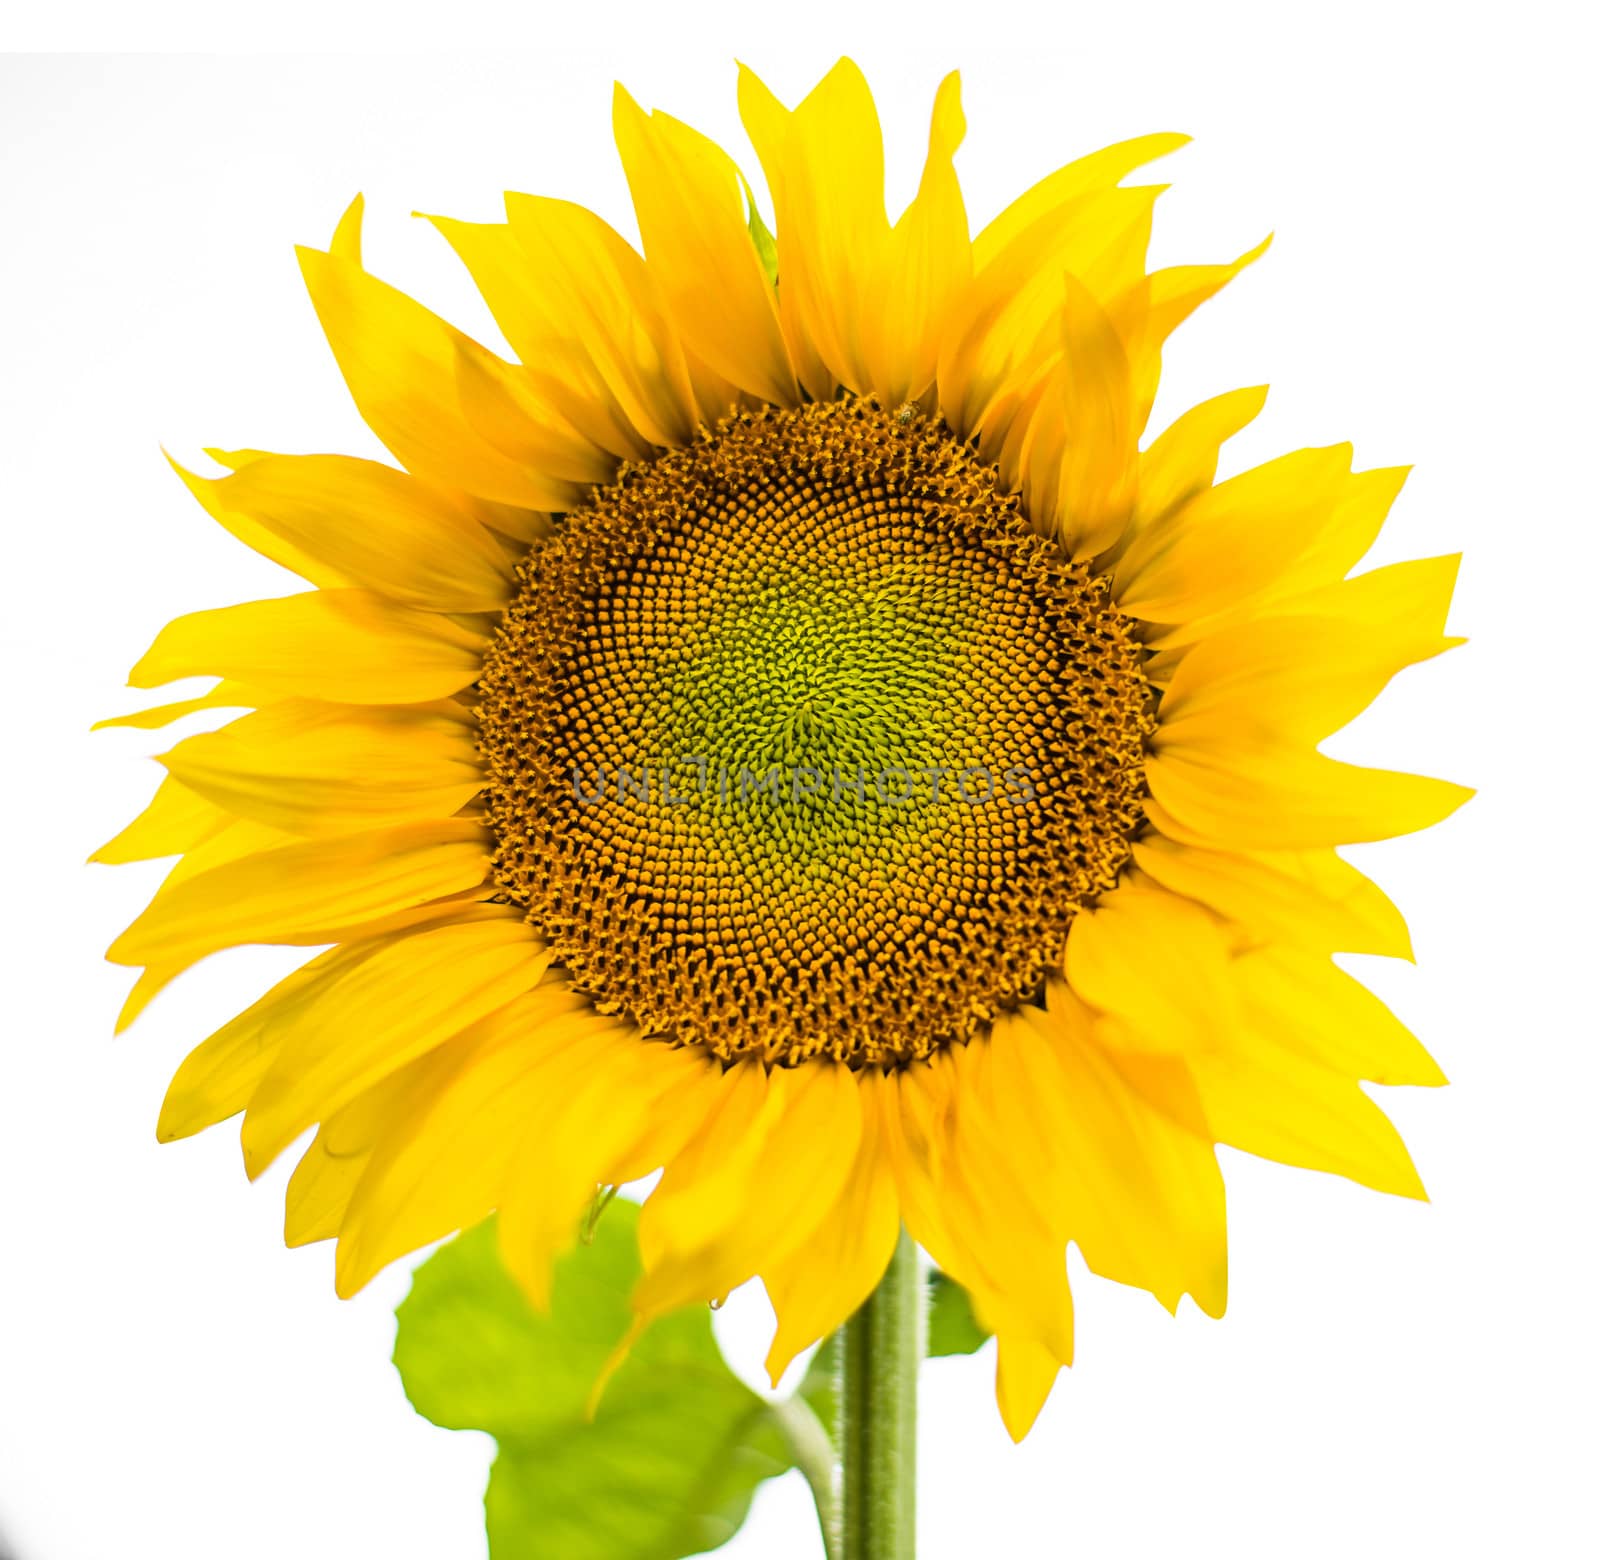 sunflower isolated on a white background